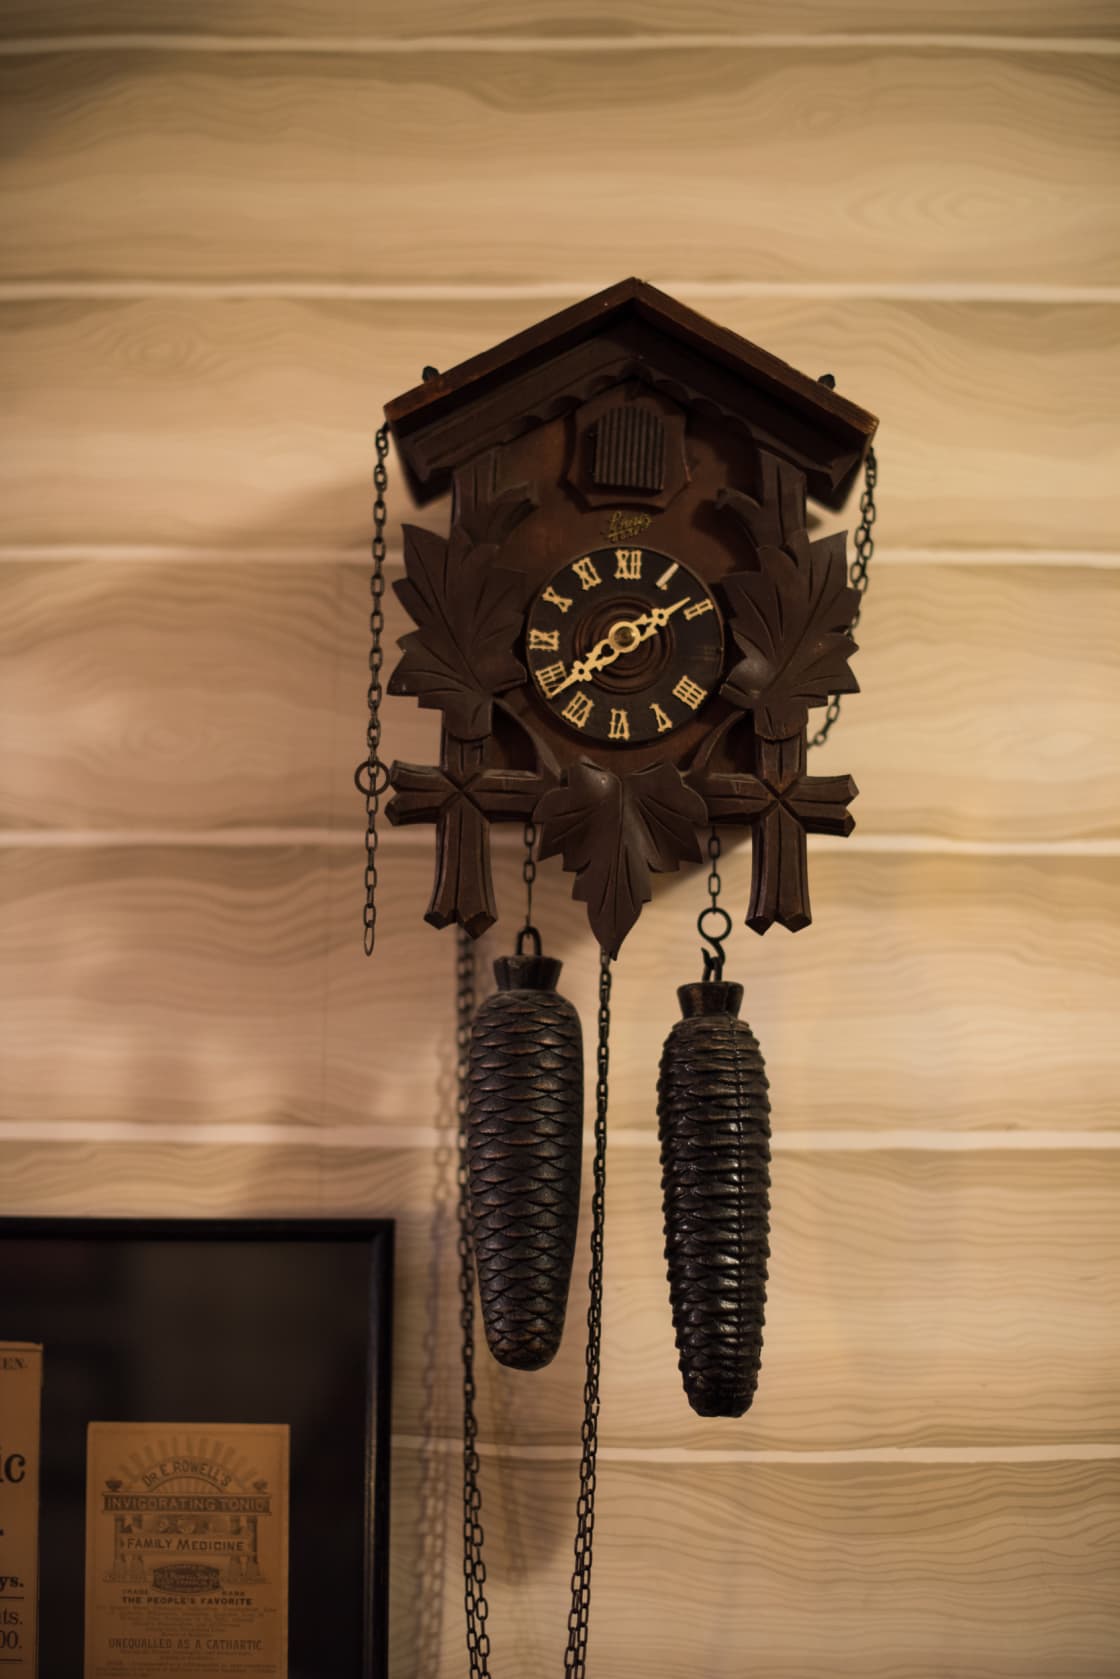 A cool cuckoo clock in the cottage